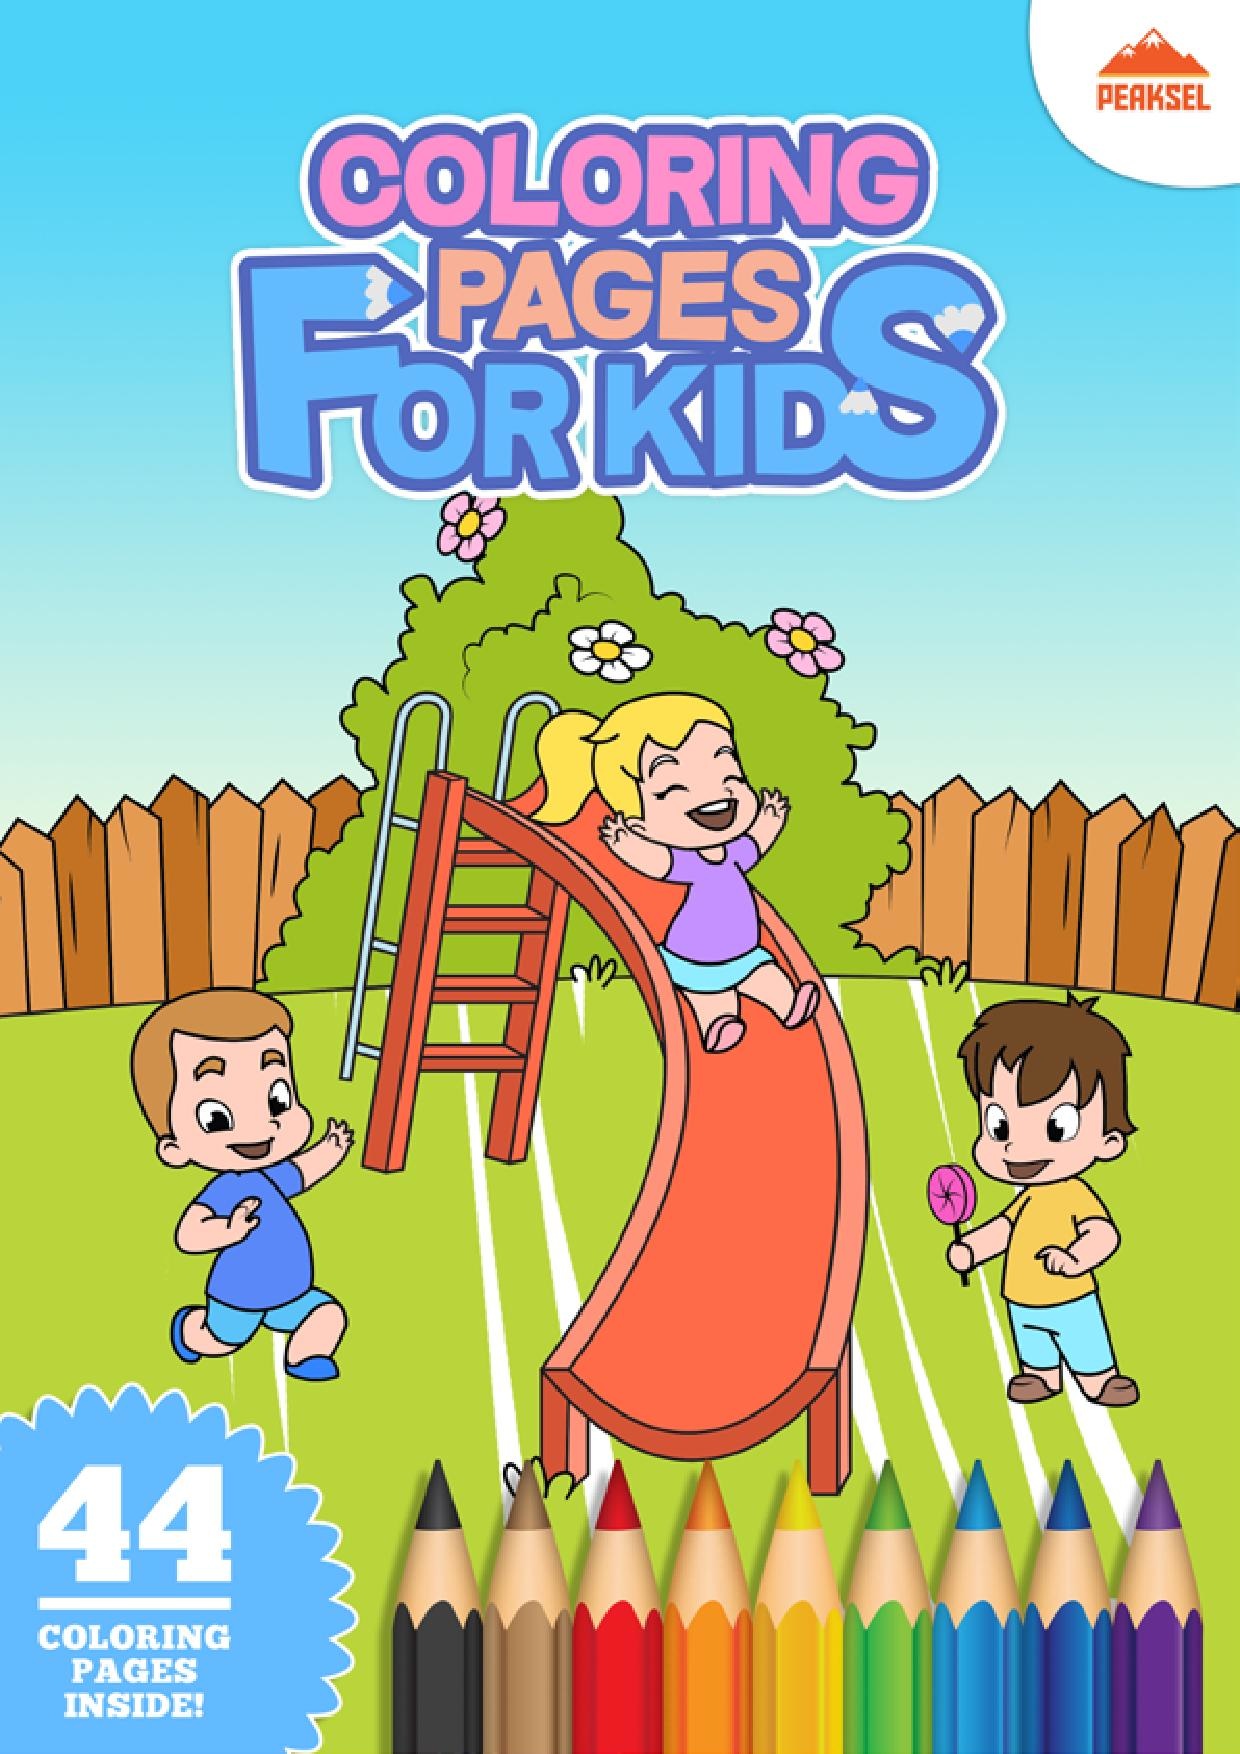 FileColoring Pages for Kids PDFpdf Wikimedia Commons